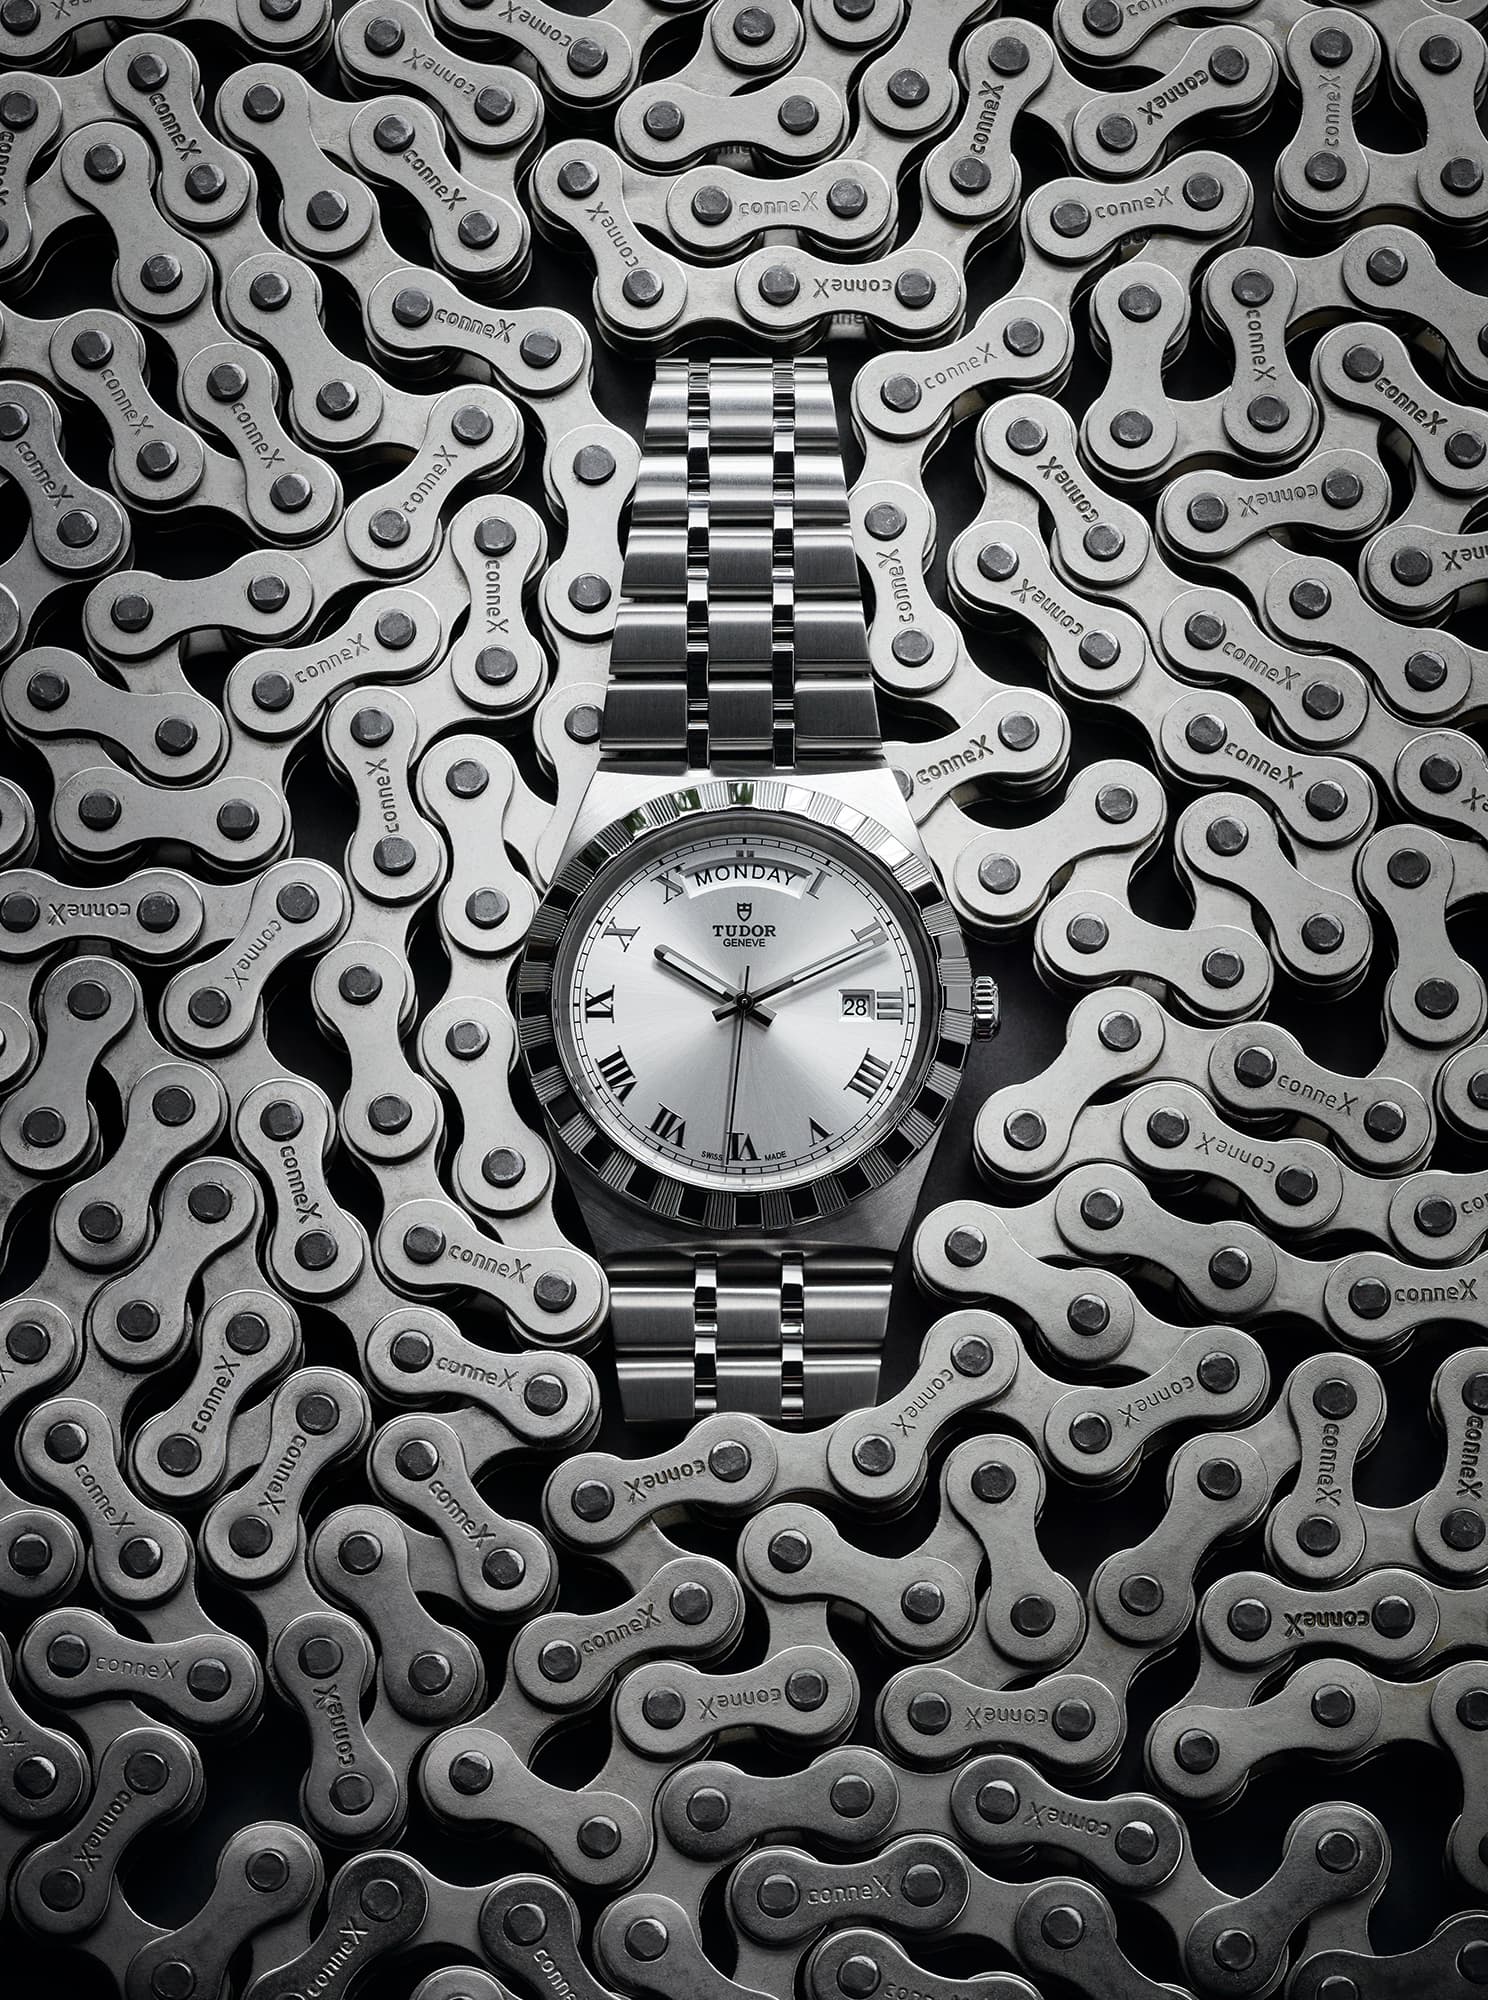 still-life-photography product-photography advertising-photography fashion accessories metal men watch surrounded by bicycle chain